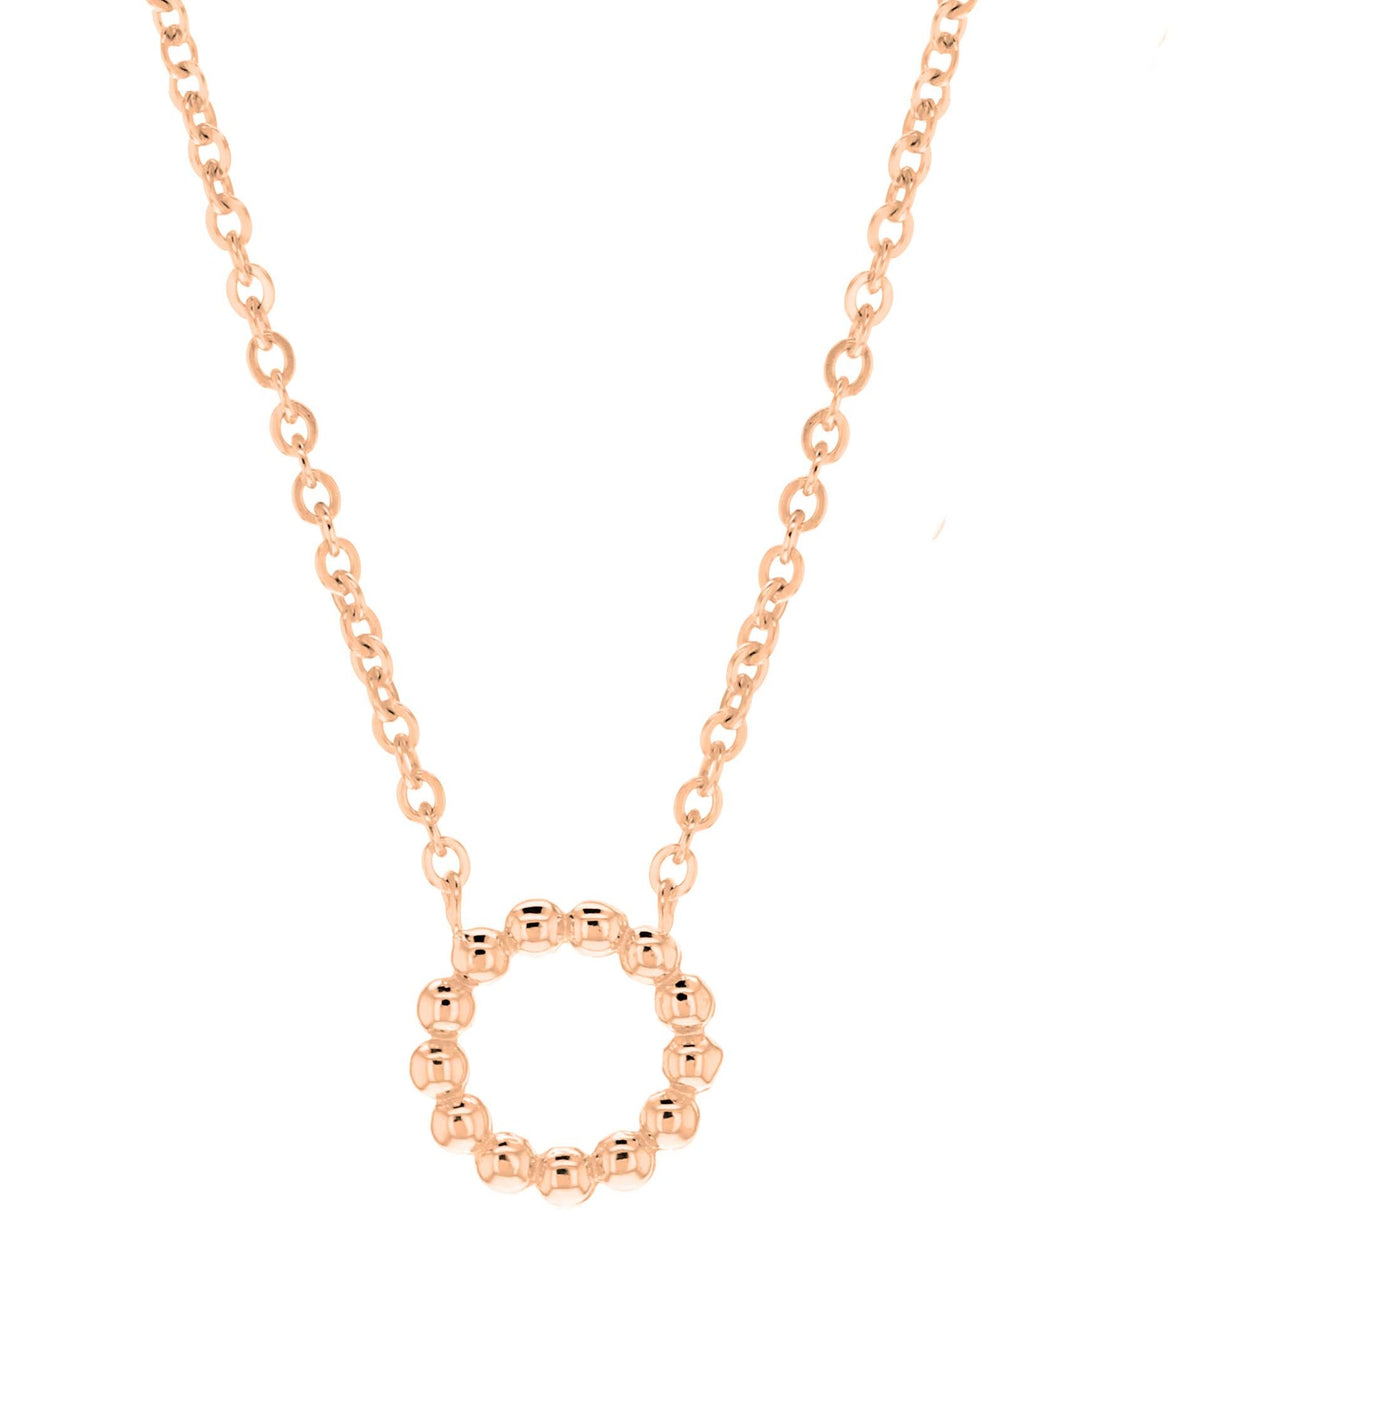 9ct Rose gold Beaded Open Circle Necklace.